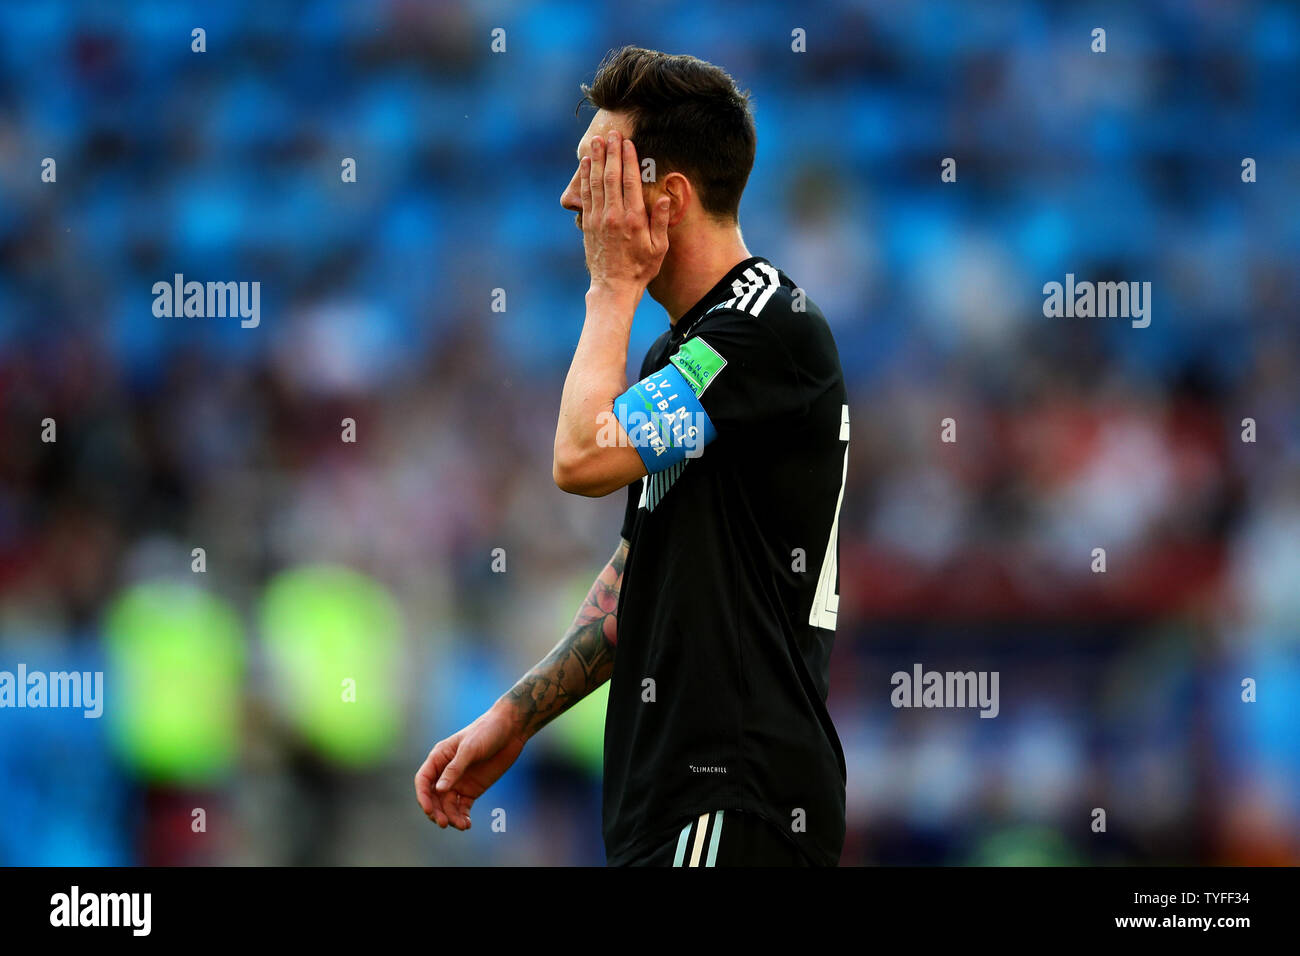 Lionel Messi of Argentina reacts during the 2018 FIFA World Cup Group D match at Spartak Stadium in Moscow, Russia on June 16, 2018. Photo by Chris Brunskill/UPI Stock Photo